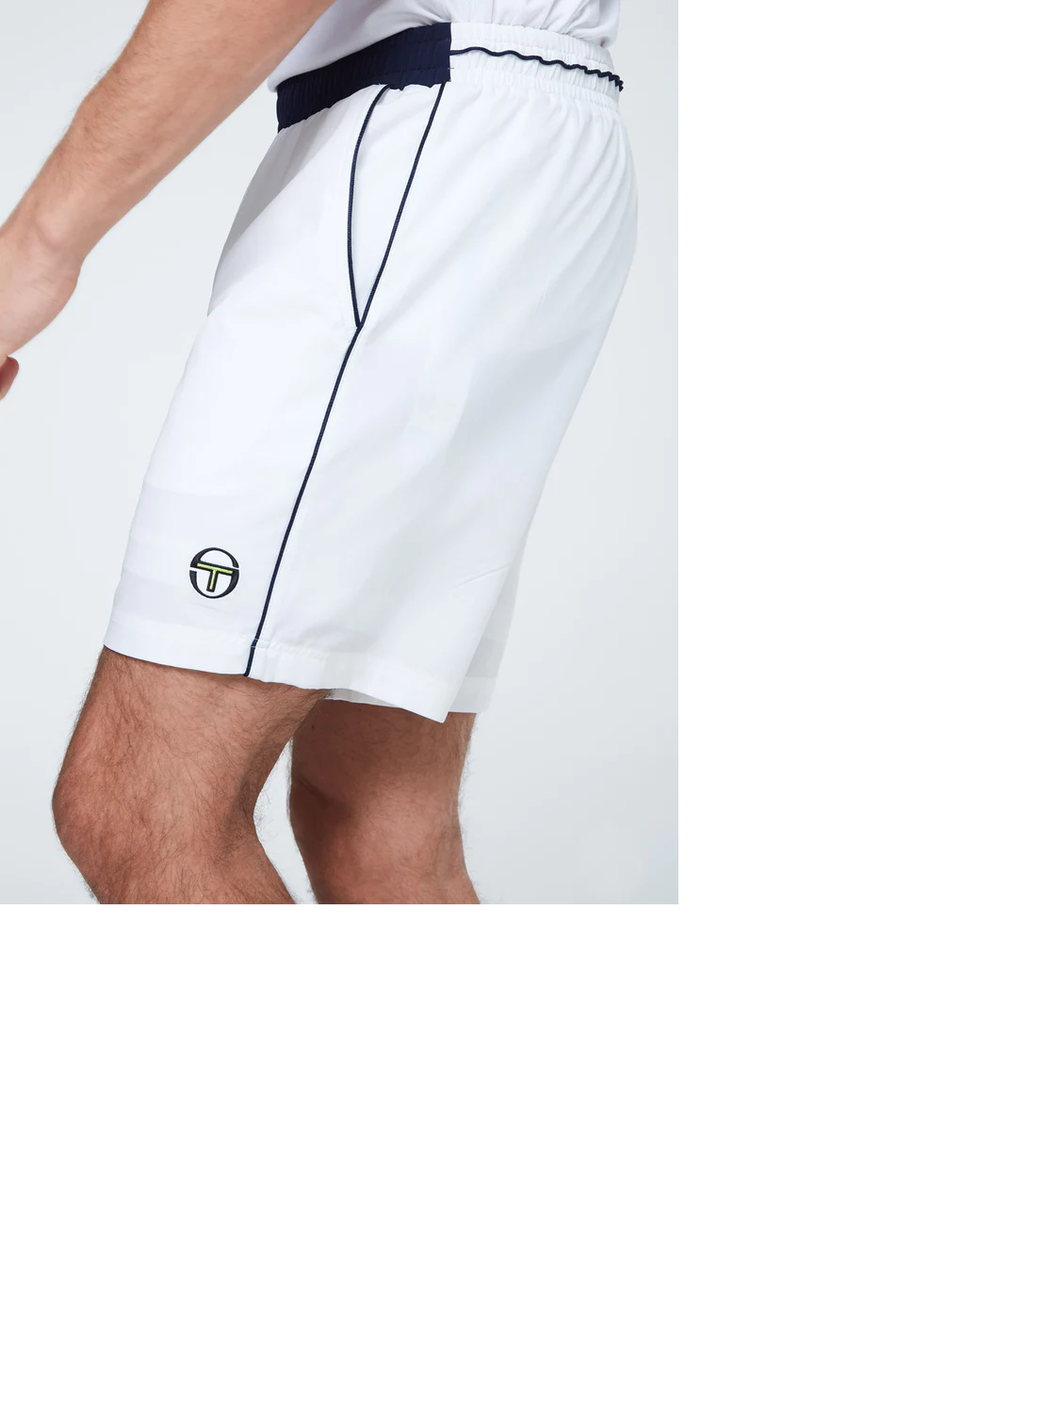 Sergio Tacchini TCP Shorts - White/Navy ( GOES WITH THE TCP POLO)